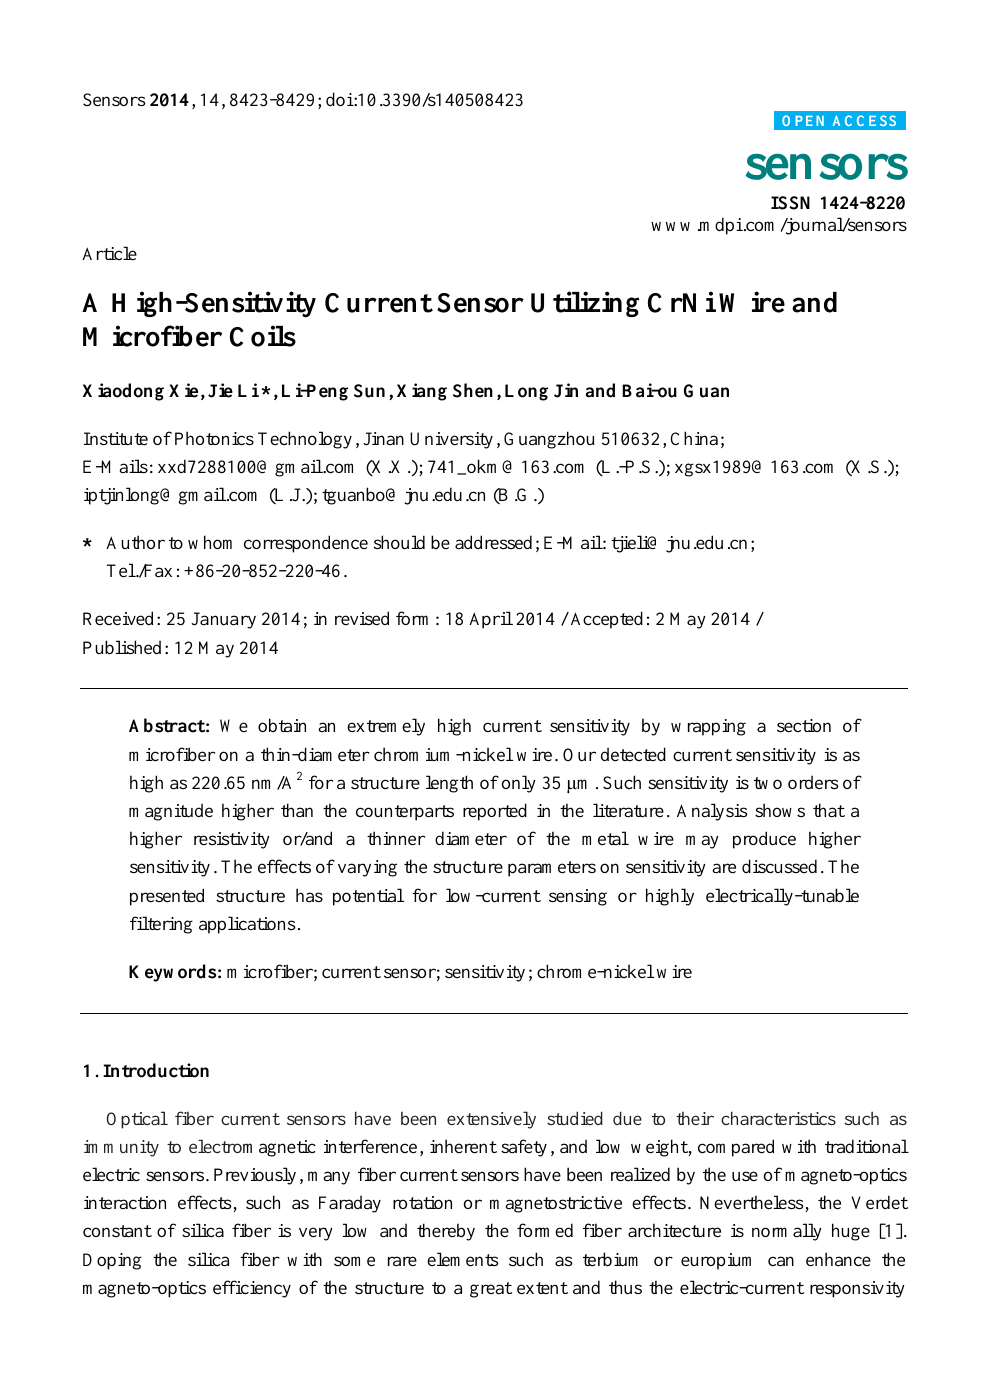 A High Sensitivity Current Sensor Utilizing Crni Wire And Microfiber Coils Topic Of Research Paper In Nano Technology Download Scholarly Article Pdf And Read For Free On Cyberleninka Open Science Hub